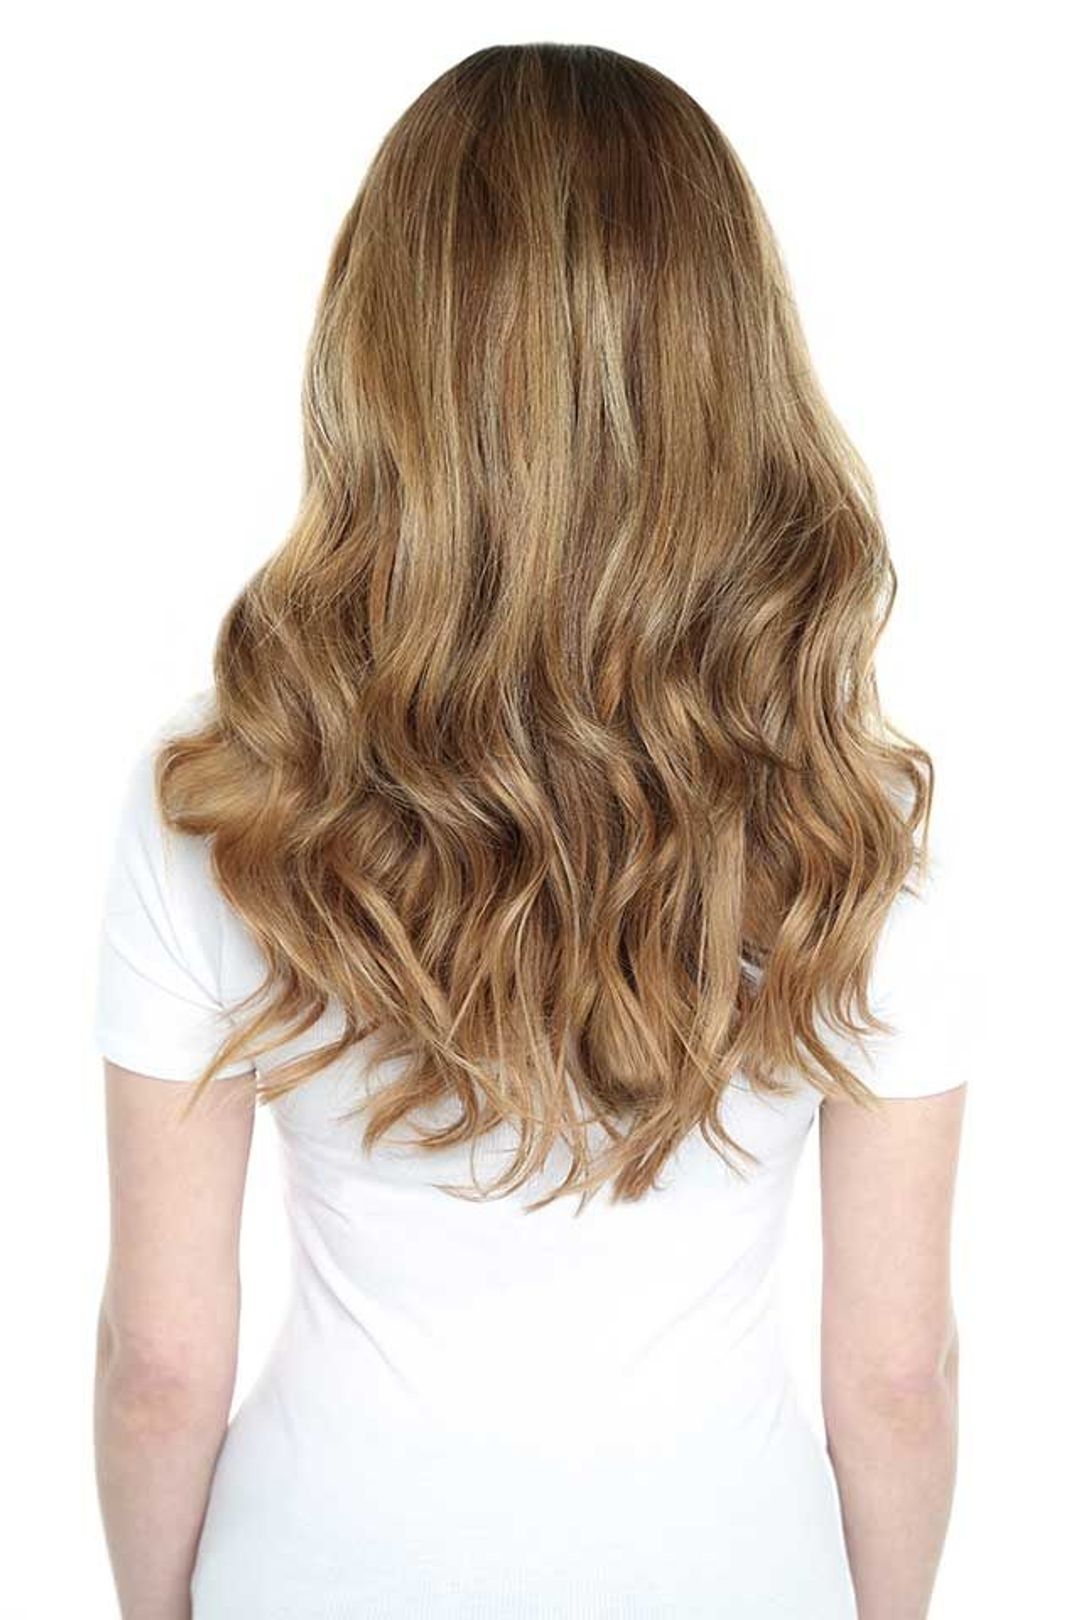 Beauty Works Celebrity Choice Weft Hair Extensions - Amber,16"